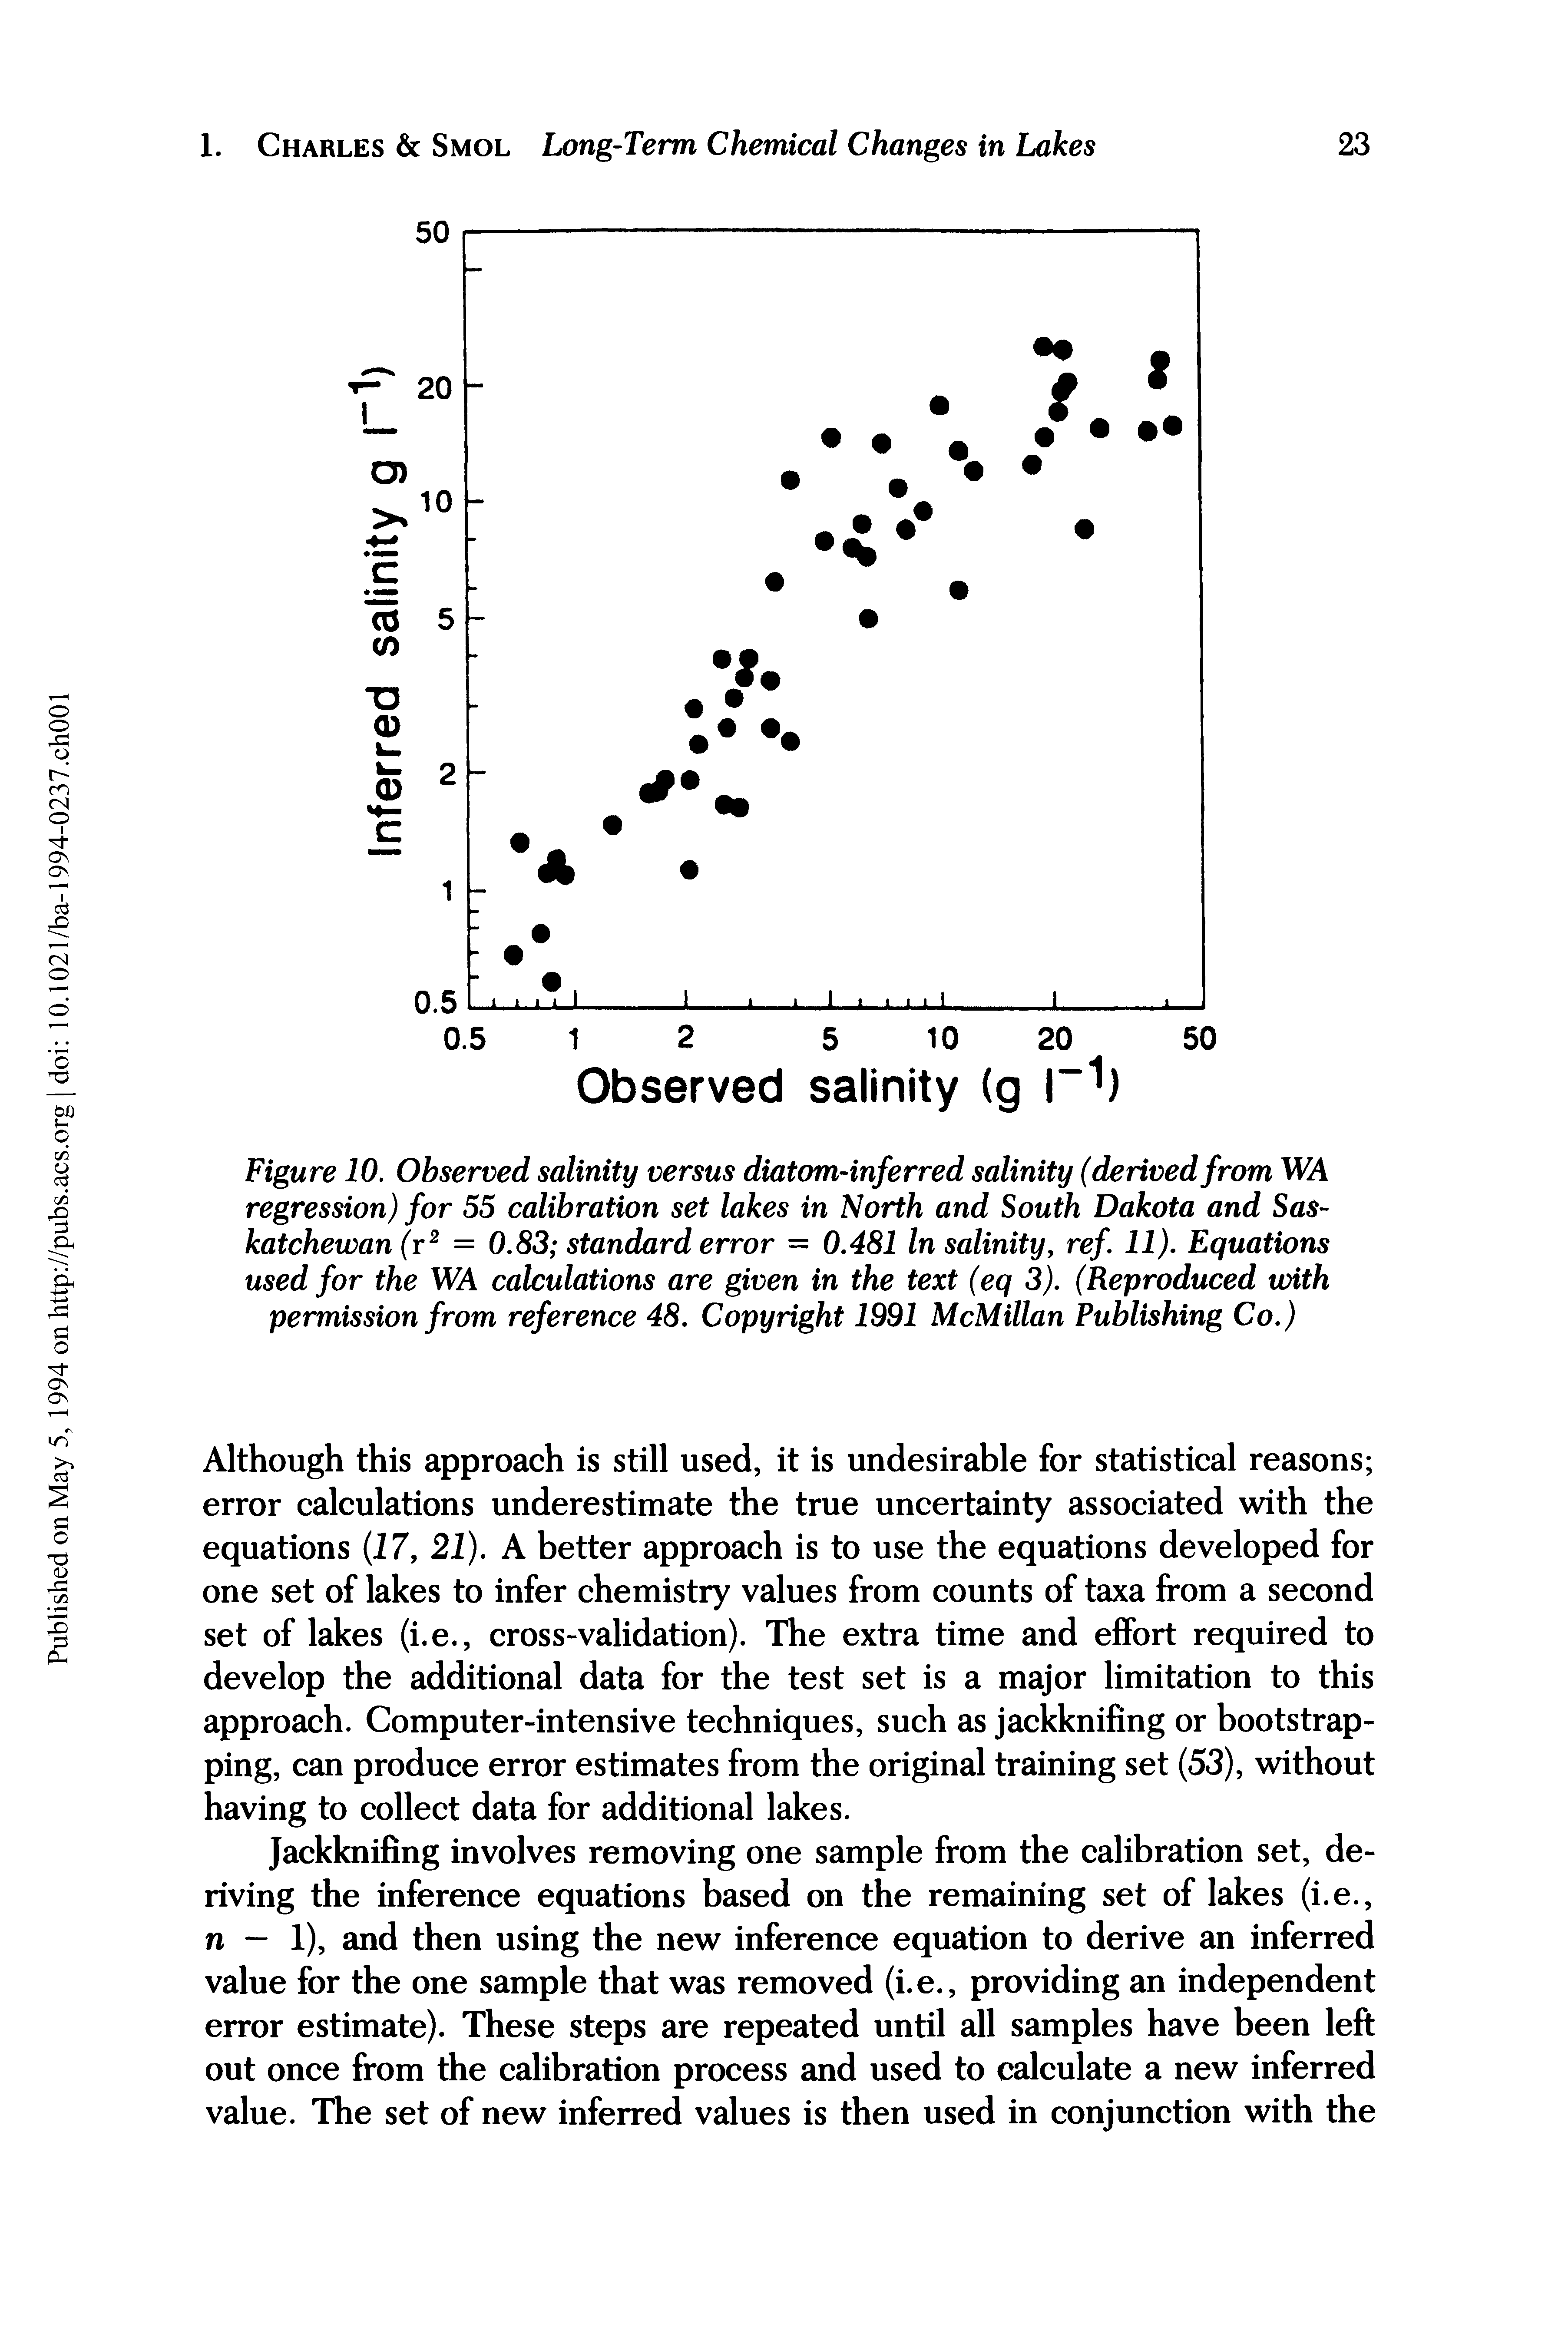 Figure 10. Observed salinity versus diatom-inferred salinity (derived from WA regression) for 55 calibration set lakes in North and South Dakota and Saskatchewan (r2 = 0.83 standard error — 0.481 In salinity, ref. 11). Equations used for the WA calculations are given in the text (eq 3). (Reproduced with permission from reference 48. Copyright 1991 McMillan Publishing Co.)...